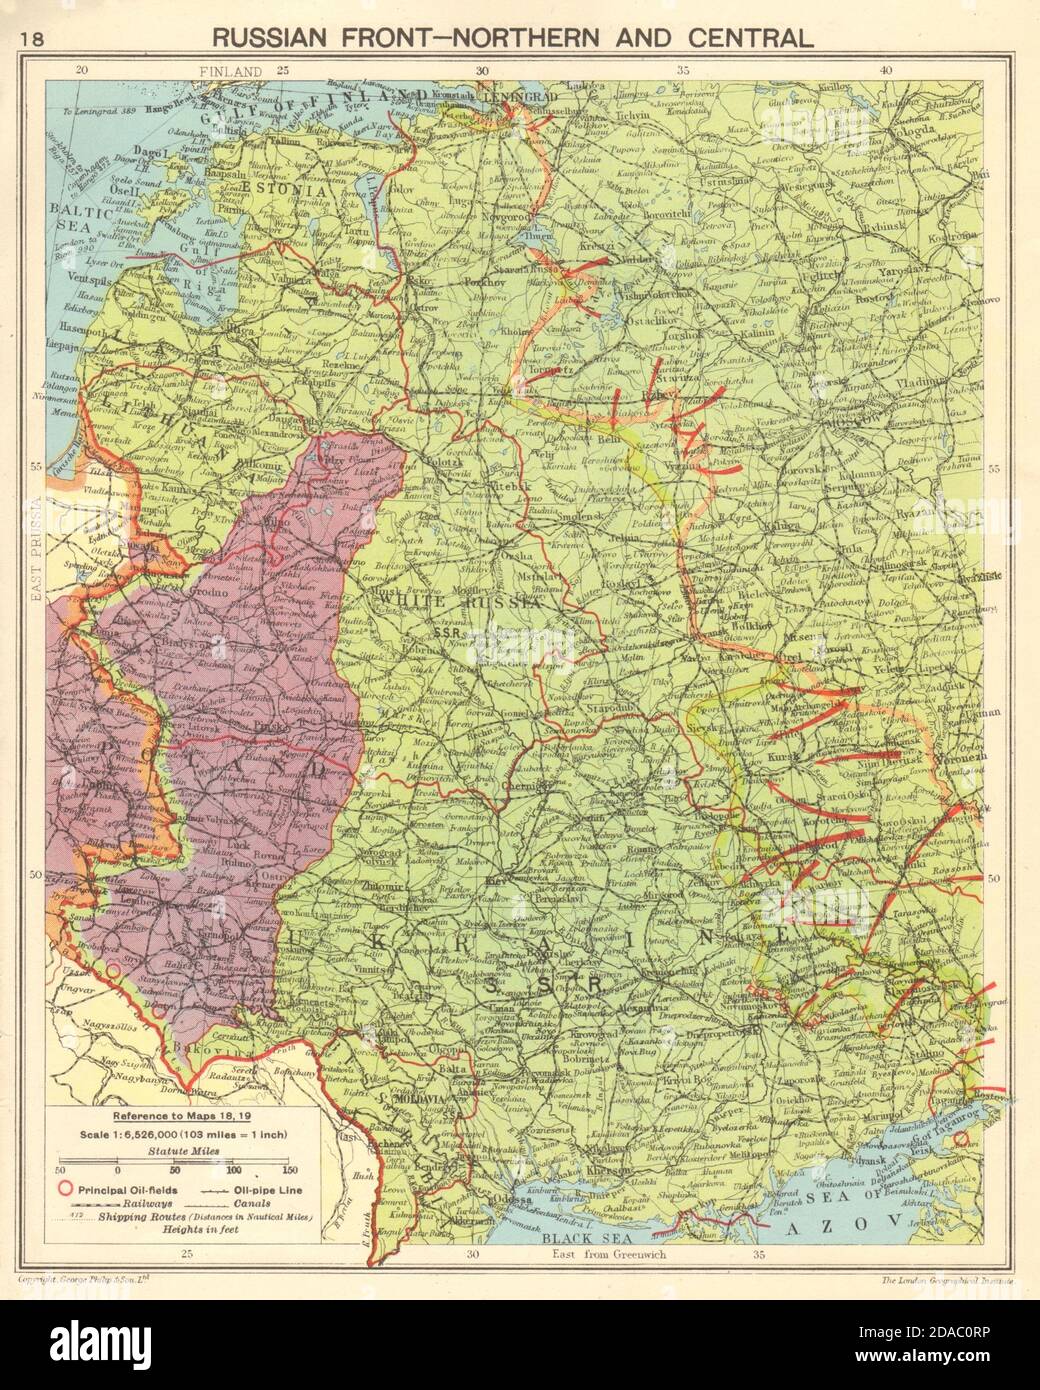 WORLD WAR 2. Eastern Front. Limit of German advance. Russian offensive 1943 map Stock Photo